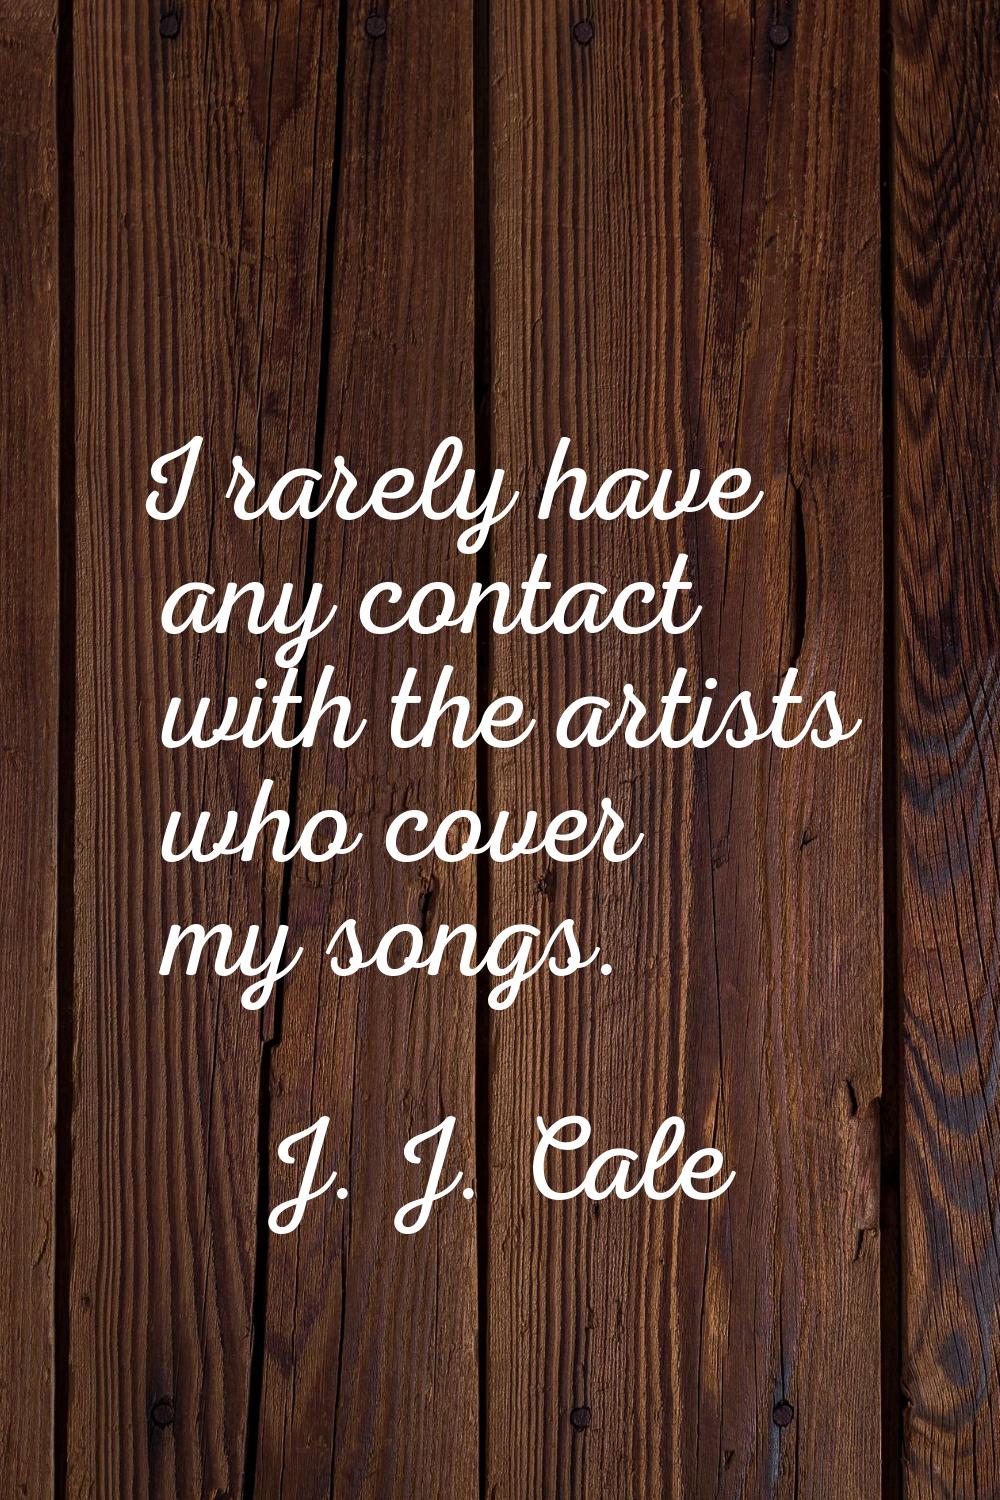 I rarely have any contact with the artists who cover my songs.